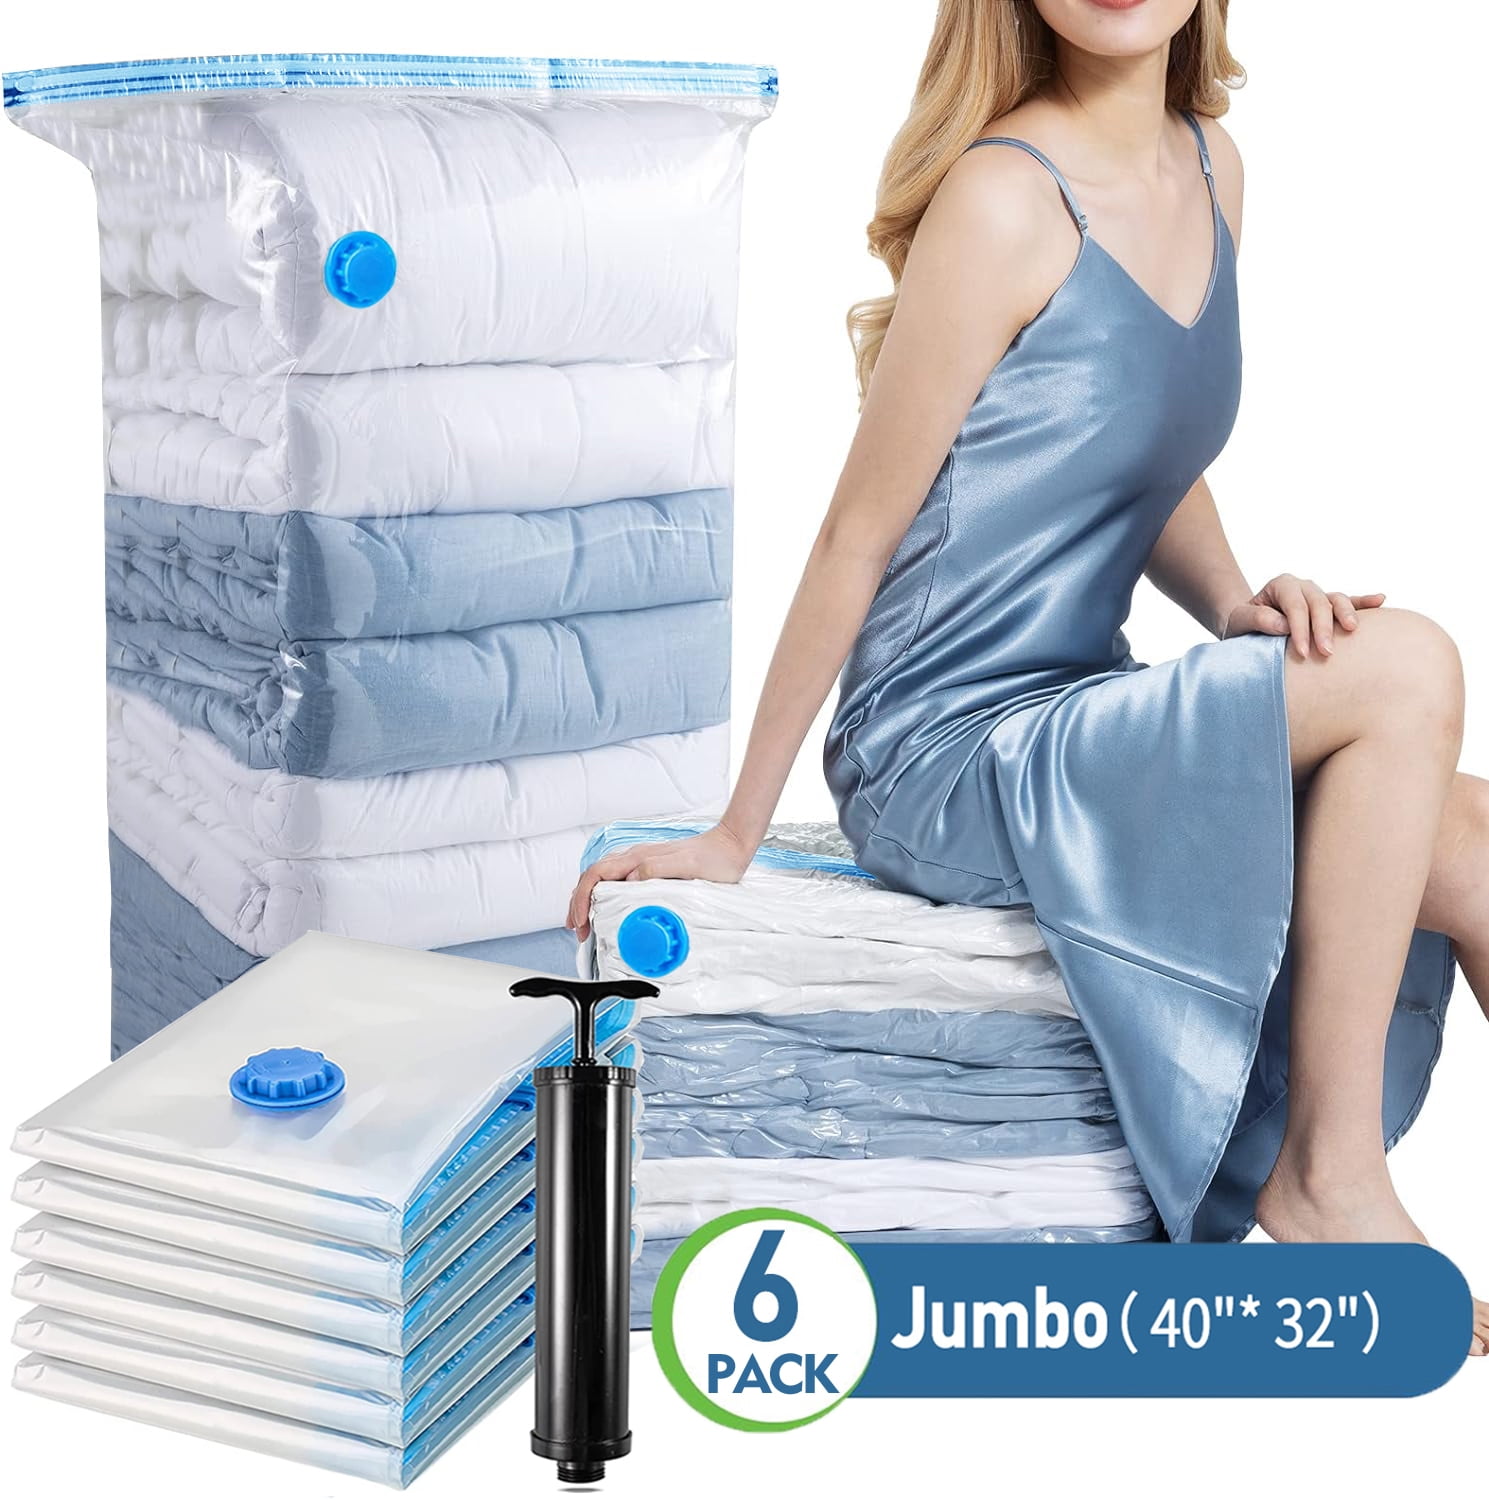 Spedalon 12 Vacuum Storage Bags for Clothes - Jumbo, Large, Medium & Small  - Space Saver Vacuum Bags for Comforters, Blankets, Bedding, Pillow 